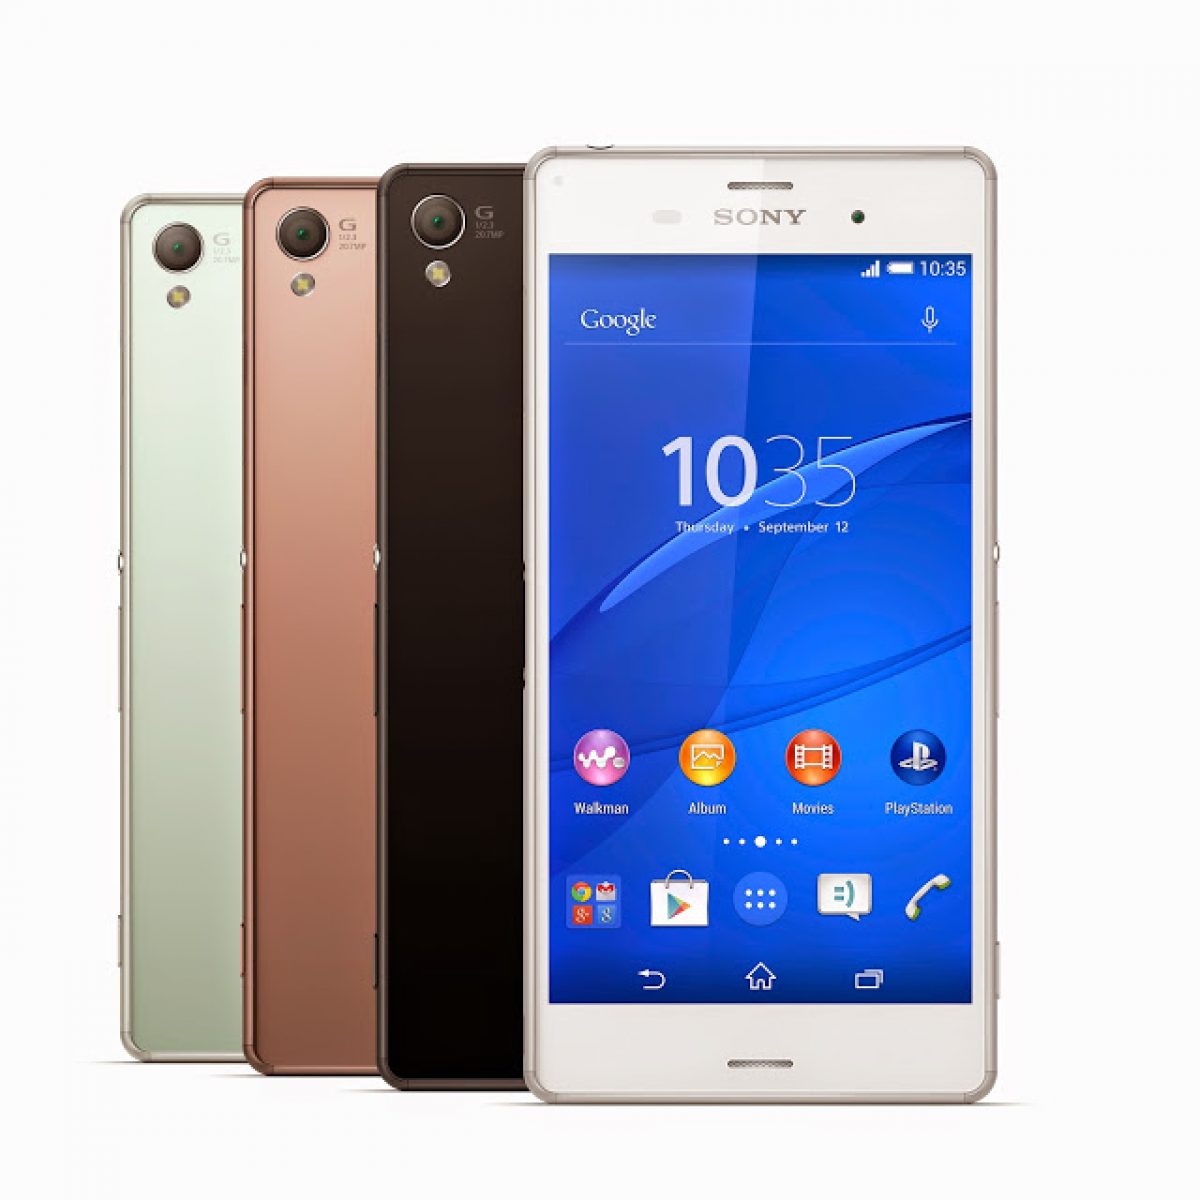 onderpand Toevallig Centraliseren Sony Xperia Z3 and Z3 Compact launched in India for Rs. 51,990 and Rs.  44,990 respectively | TelecomTalk